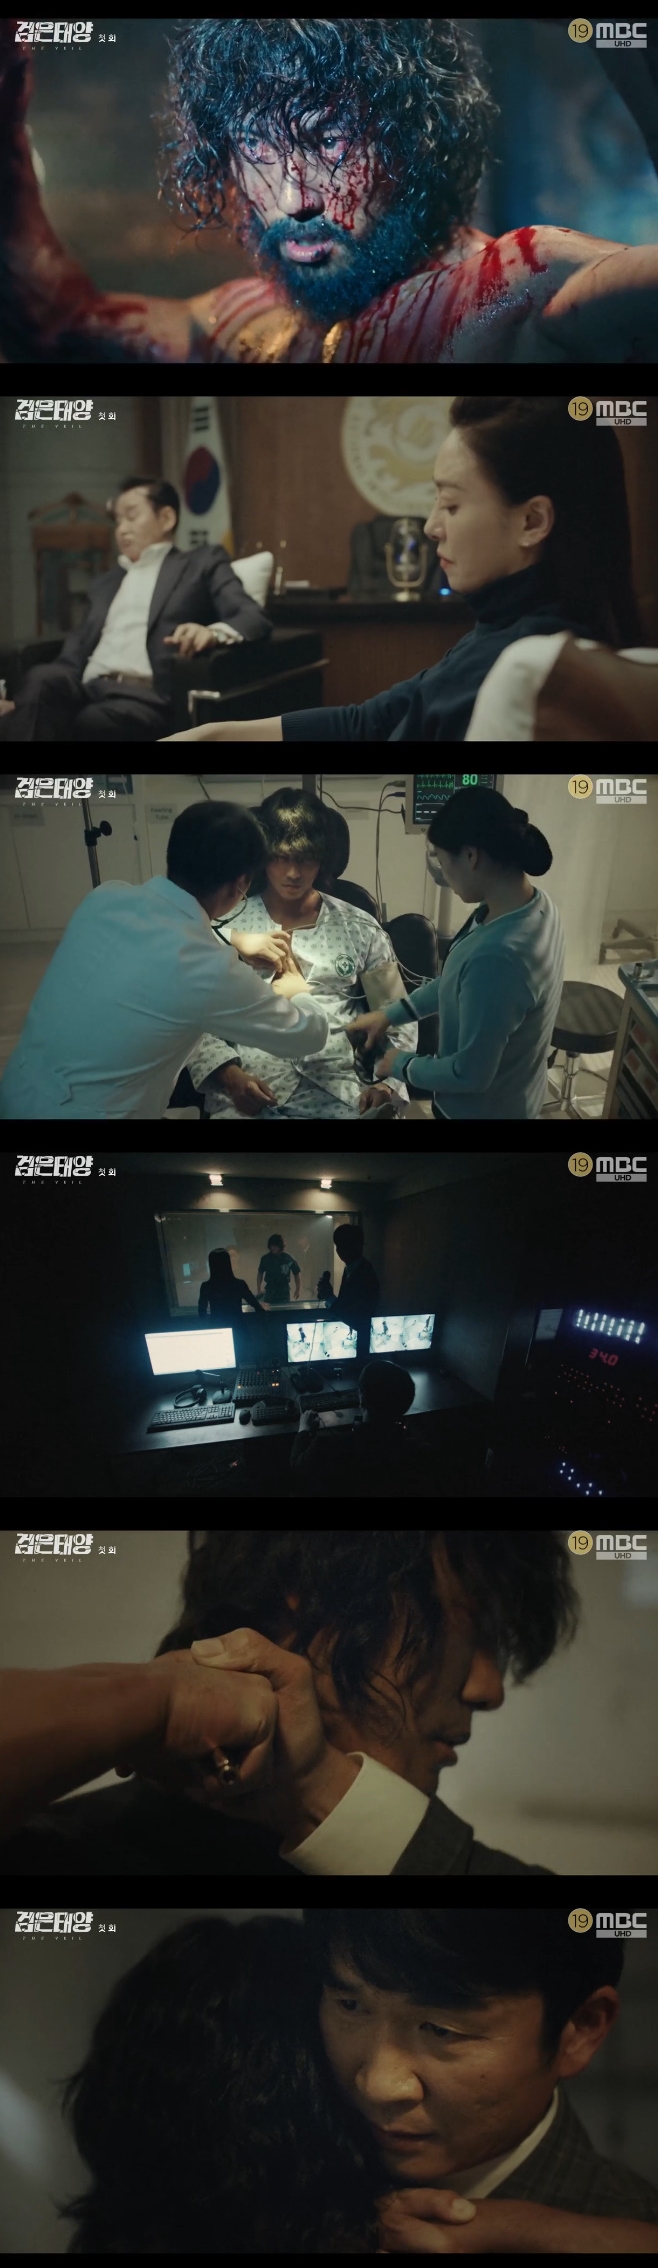 The Veil showed intense Reversal story development from the beginning.In the first MBC new gilt drama The Veil (playplayplayed by Park Seok-ho and directed by Kim Sung-yong), which was first broadcast on the night of the 17th, Han Ji-hyuk (Namgoong Min) was shown trying to regain the memory he lost.Han Ji-hyuk was found on a stowaway ship a year after he disappeared. Do Jin-sook (Jang Young-nam), the second deputy director of the NISs overseas part, took him out and began investigating him.However, Han Ji-hyuk had lost all of his memory since he disappeared. The whole body was found to have long-term detention and torture.There is no particular abnormality except that, he said. Instead, dozens of neurochemicals were found. Some of them erase Memory.Someone seems to have deliberately erased Memory by continuously administering a small amount of medication. There is no Memory before it disappeared. Han Ji-hyuk, who was angry at the NIS staff who asked only about the past, turned over his desk and said, Its hard.This is the honor of the man who crossed the limbs. It is me, not you, who should ask now. Stop hiding behind it. In the case of Ji-hyeok, who did not blow anything, Do Jin-suk tried hypnotic therapy but it did not work.Fortunately, Kang Pil-ho (Kim Jong-tae)s performance was able to pass the dangerous moment well, but Han Ji-hyuk was a time bomb itself.Nevertheless, Do Jin-suk ordered, All the secrets are in his head, but I can not wait for it to come to mind.While Han Ji-hyuk, who returned home, was suffering from PTSD (post-traumatic stress disorder), a call came from Seo Soo-yeon (Park Hae-sun). Seo Soo-yeon, who faced Han Ji-hyuk, said, How about?I felt like I was falling into a bad place. I just heard what you were in.I do not know it, I have piled up a mountain of things I want to ask, but it is all useless. You have never accepted us as a family.You were something we were nothing about, he said.Seo Soo-yeon said, Is it Memory that I did?I did not forget it, and when Han Ji-hyuk did not answer, Seo Soo-yeon said, After that, I checked it myself.I couldnt see how crushed my face was. You should have seen it yourself. I wouldnt have forgotten it. Memory it.Whatever it takes. Who did it, what it was, what it was like last time. Everything. Youre the best in the world.So now save yourself. But Han Ji-hyuk said, Is this feeling because of the quartz? I dont understand. There were three people there.In such a situation, I can not understand how much I think that two people were found 300 km away without contact.Is it really that you have not received any contact from us? Seo Soo-yeon replied, Is that what you are talking to me in this situation? You still do not know what is wrong?Soon after, Han started packing up to find answers to his questions. The first place he was headed was the airport.The NIS agents who noticed this followed him, but Han Ji-hyuk had already fled, sneaking out of the car and heading elsewhere because someone was chasing him.Kang Pil-ho was already on the boat where he arrived.Kang Pil-ho handed a pistol to Han Ji-hyuk, asking, Why did you come here? I found it at the scene where you disappeared.You dont understand this, but you didnt leave us alone. Its been a year. What are you doing alone? Dont try to find the answer.Maybe we can find it in close proximity, so do not hurry too fast and go as you wish. So Han Ji-hyuk asked, If you do what you say, let me investigate the case a year ago. Kang Pil-ho promised, I will tell you well.The department where Han Ji-hyuk returned was a field support team under the Crime Information Integration Center, where Han Ji-hyuk was confronted again with Ha Dong-gyun (Kim Do-hyun), who was in a difficult relationship.While there was a fight with him, someone entered: Yoo Jessie J (Kim Ji-eun), who was appointed as a new partner of Baro Han Ji-hyuk, came in.Han Ji-hyuk pushed out Jessie J, who was trying to get close somehow, saying, Did you hear that? My partner is dead. Both a year ago.On the other hand, Han Ji-hyuk, who returned home, was looking out the window and found out that someone was sending Wright Lee Yong-hae Moss code on the opposite side.And soon he found out that the moss code was a hint.Han Ji-hyuk, who succeeded in finding USB at Lee Yonghae M Mart, played the video in it and said, There is a rat inside our organization.I erased my memory to find the traitor. 